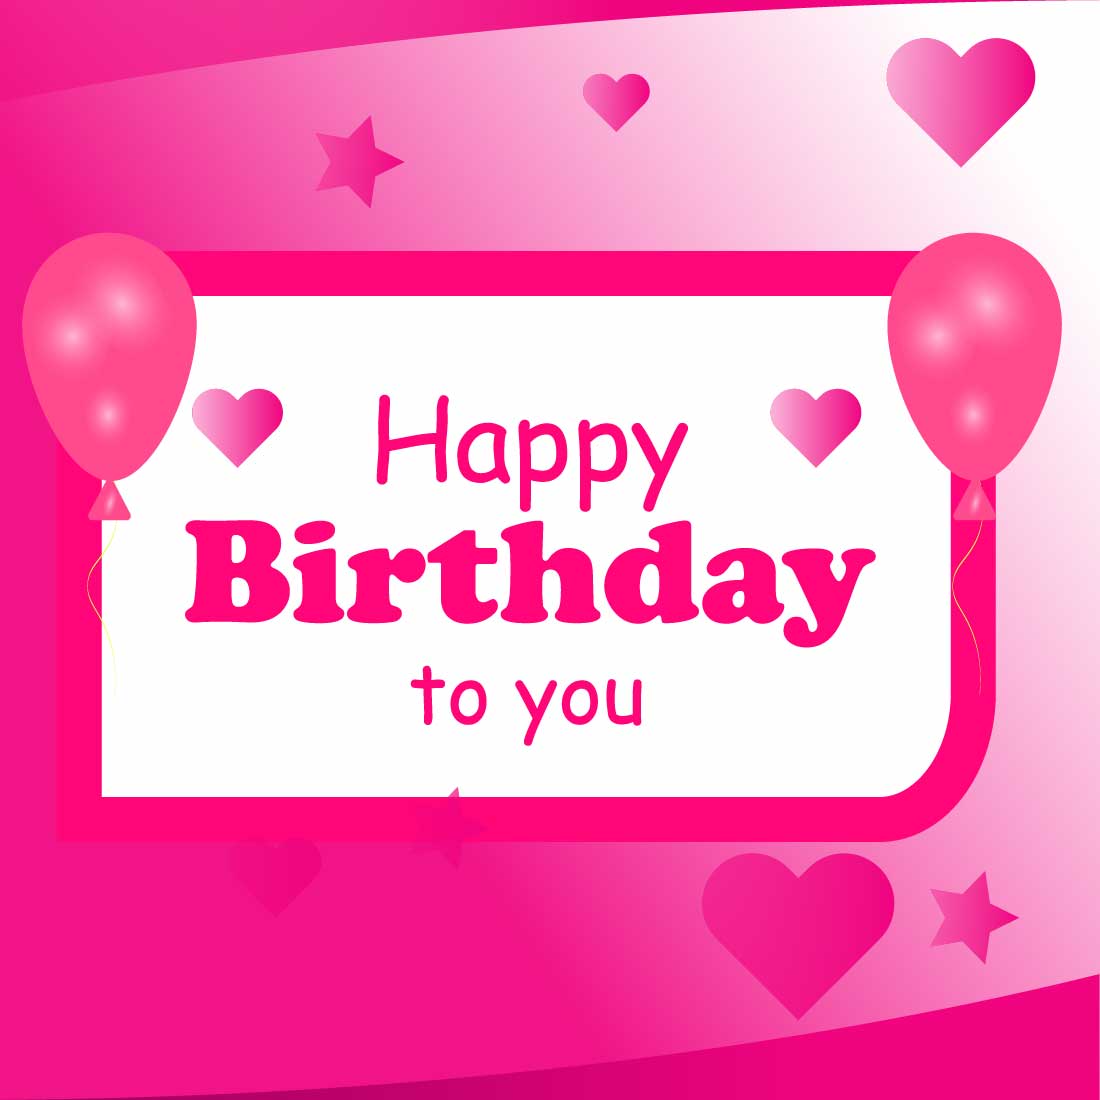 Happy Birthday to You Card Design The Zipped folders includes AI, PSD, EPS, SVG and HQ JPG Image preview image.